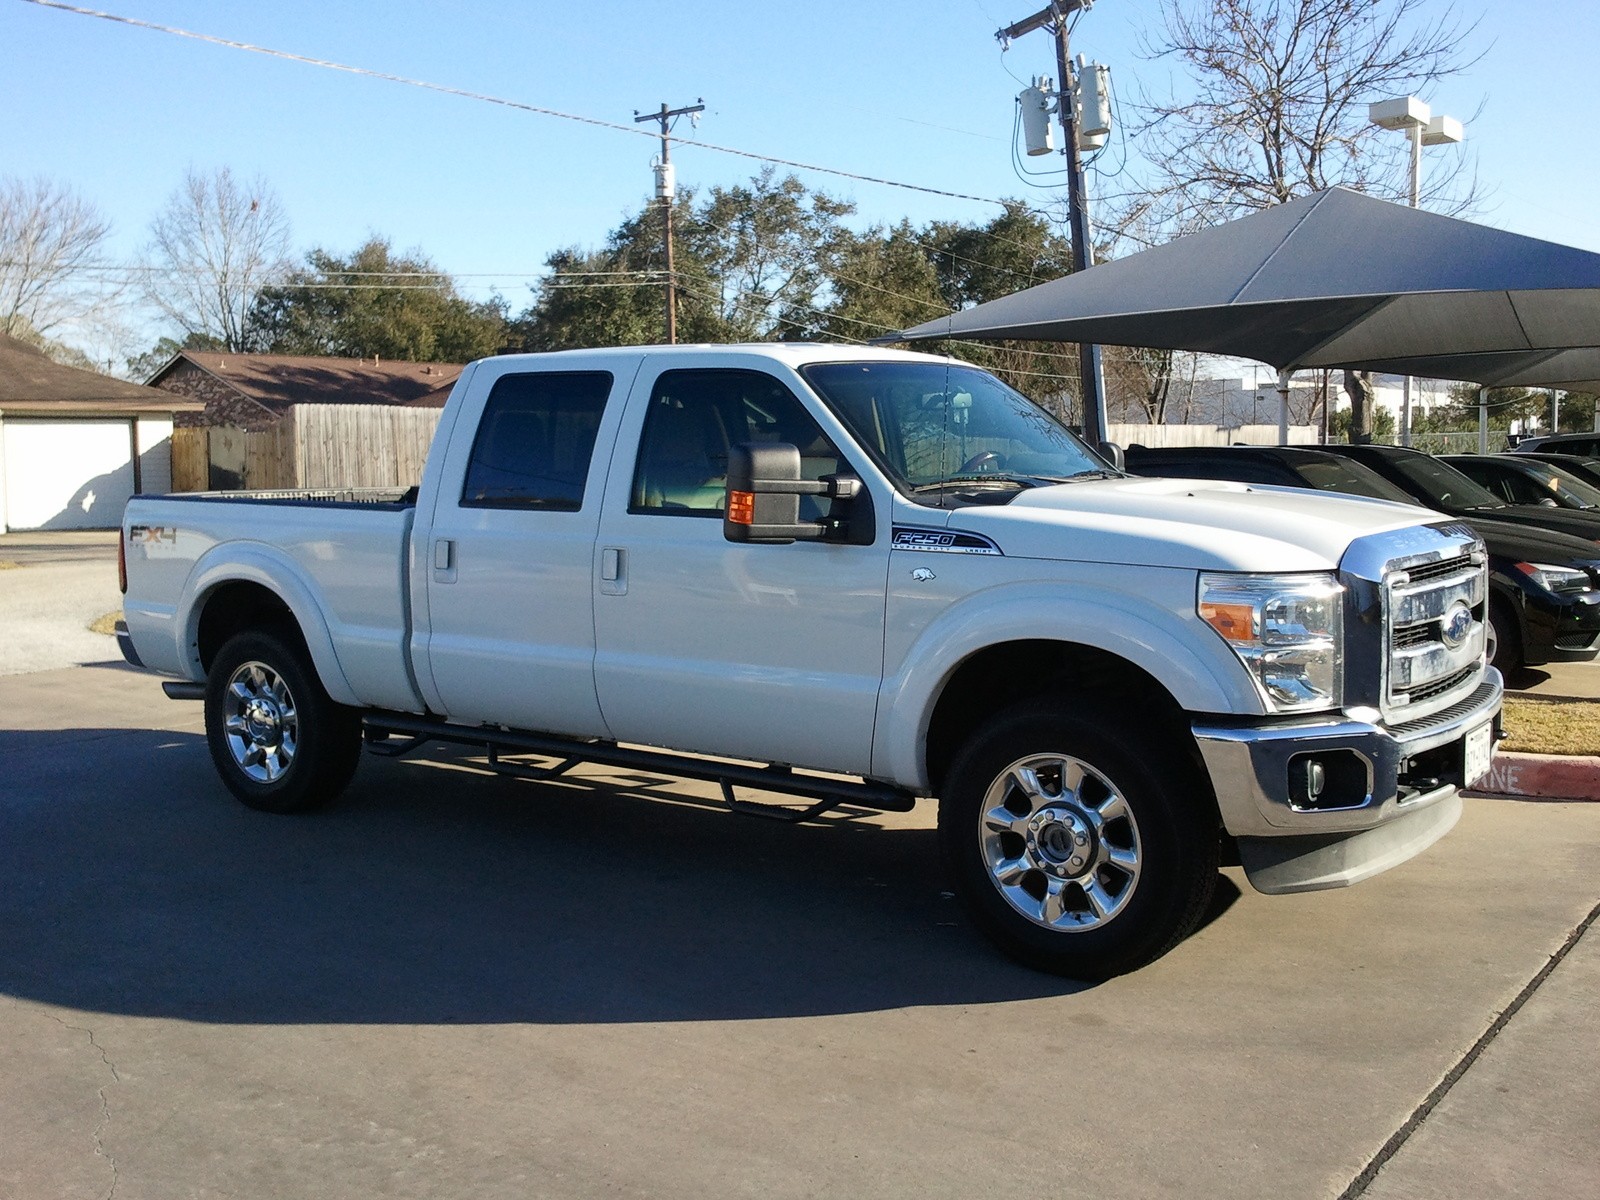 2011 FORD F-250